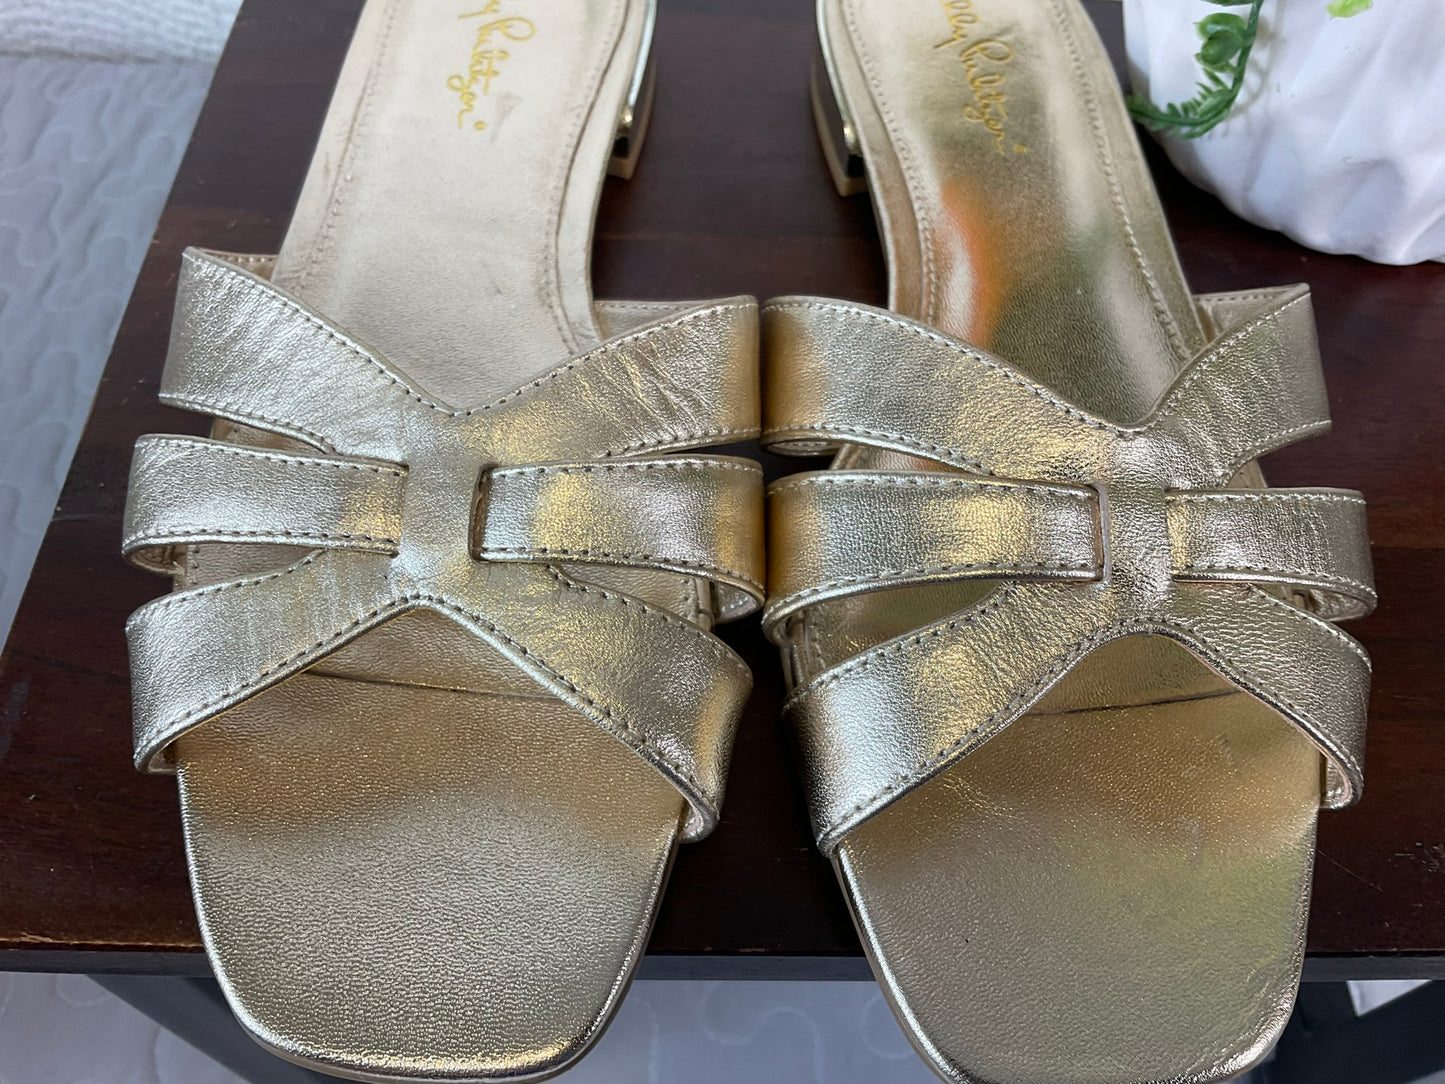 Lily Pulitzer Whitley Slide Sandals, Size 8 M